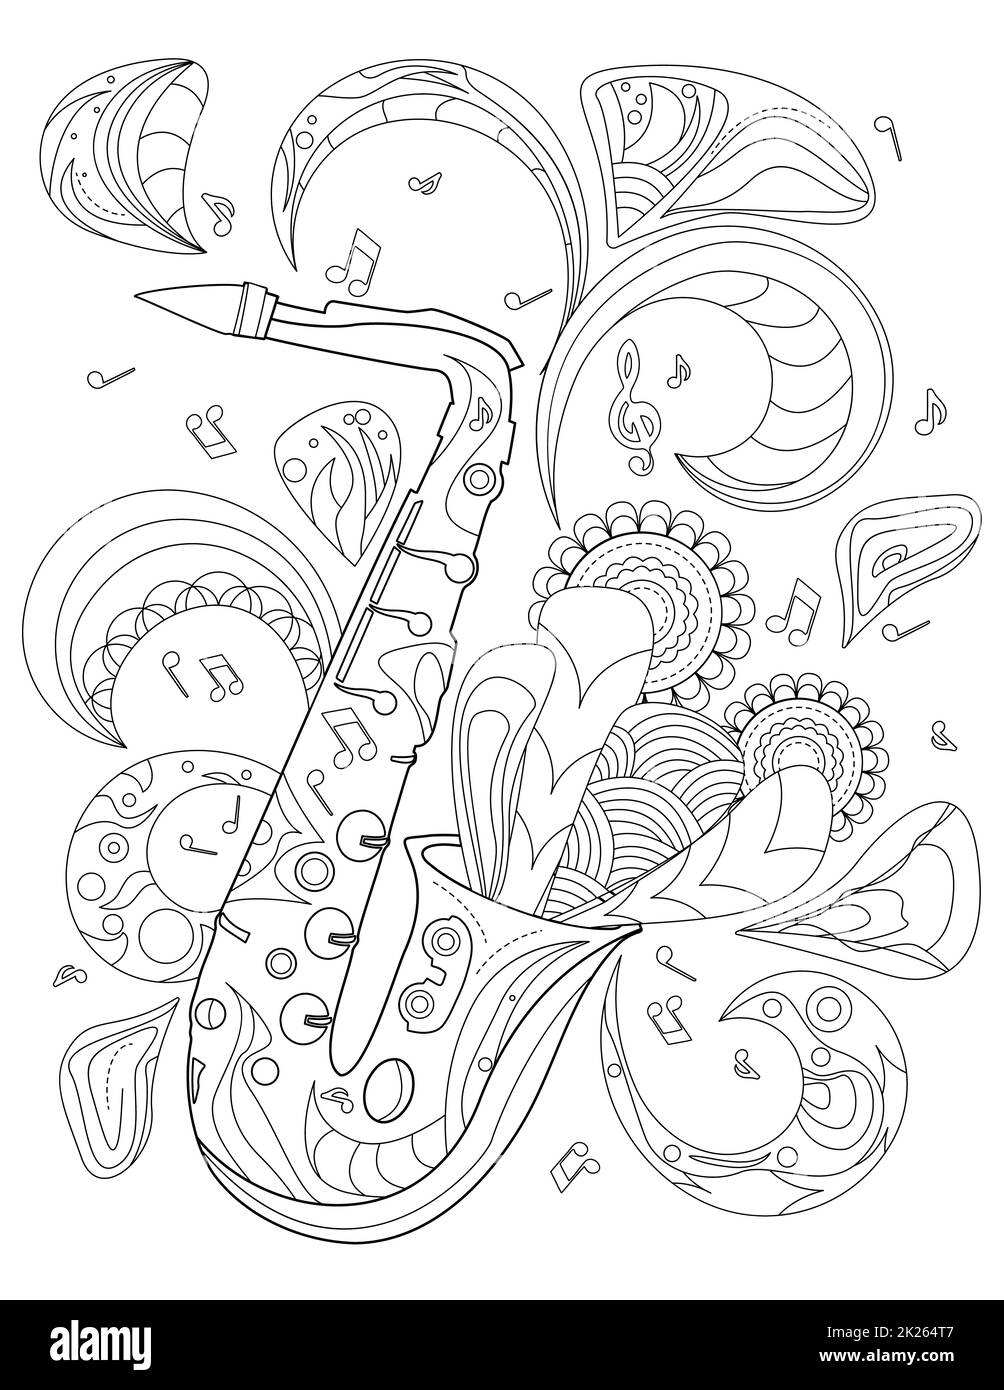 Sax Instrument Line Drawing Playing Music With Flowers Coming Out From It Coloring Book Stock Photo